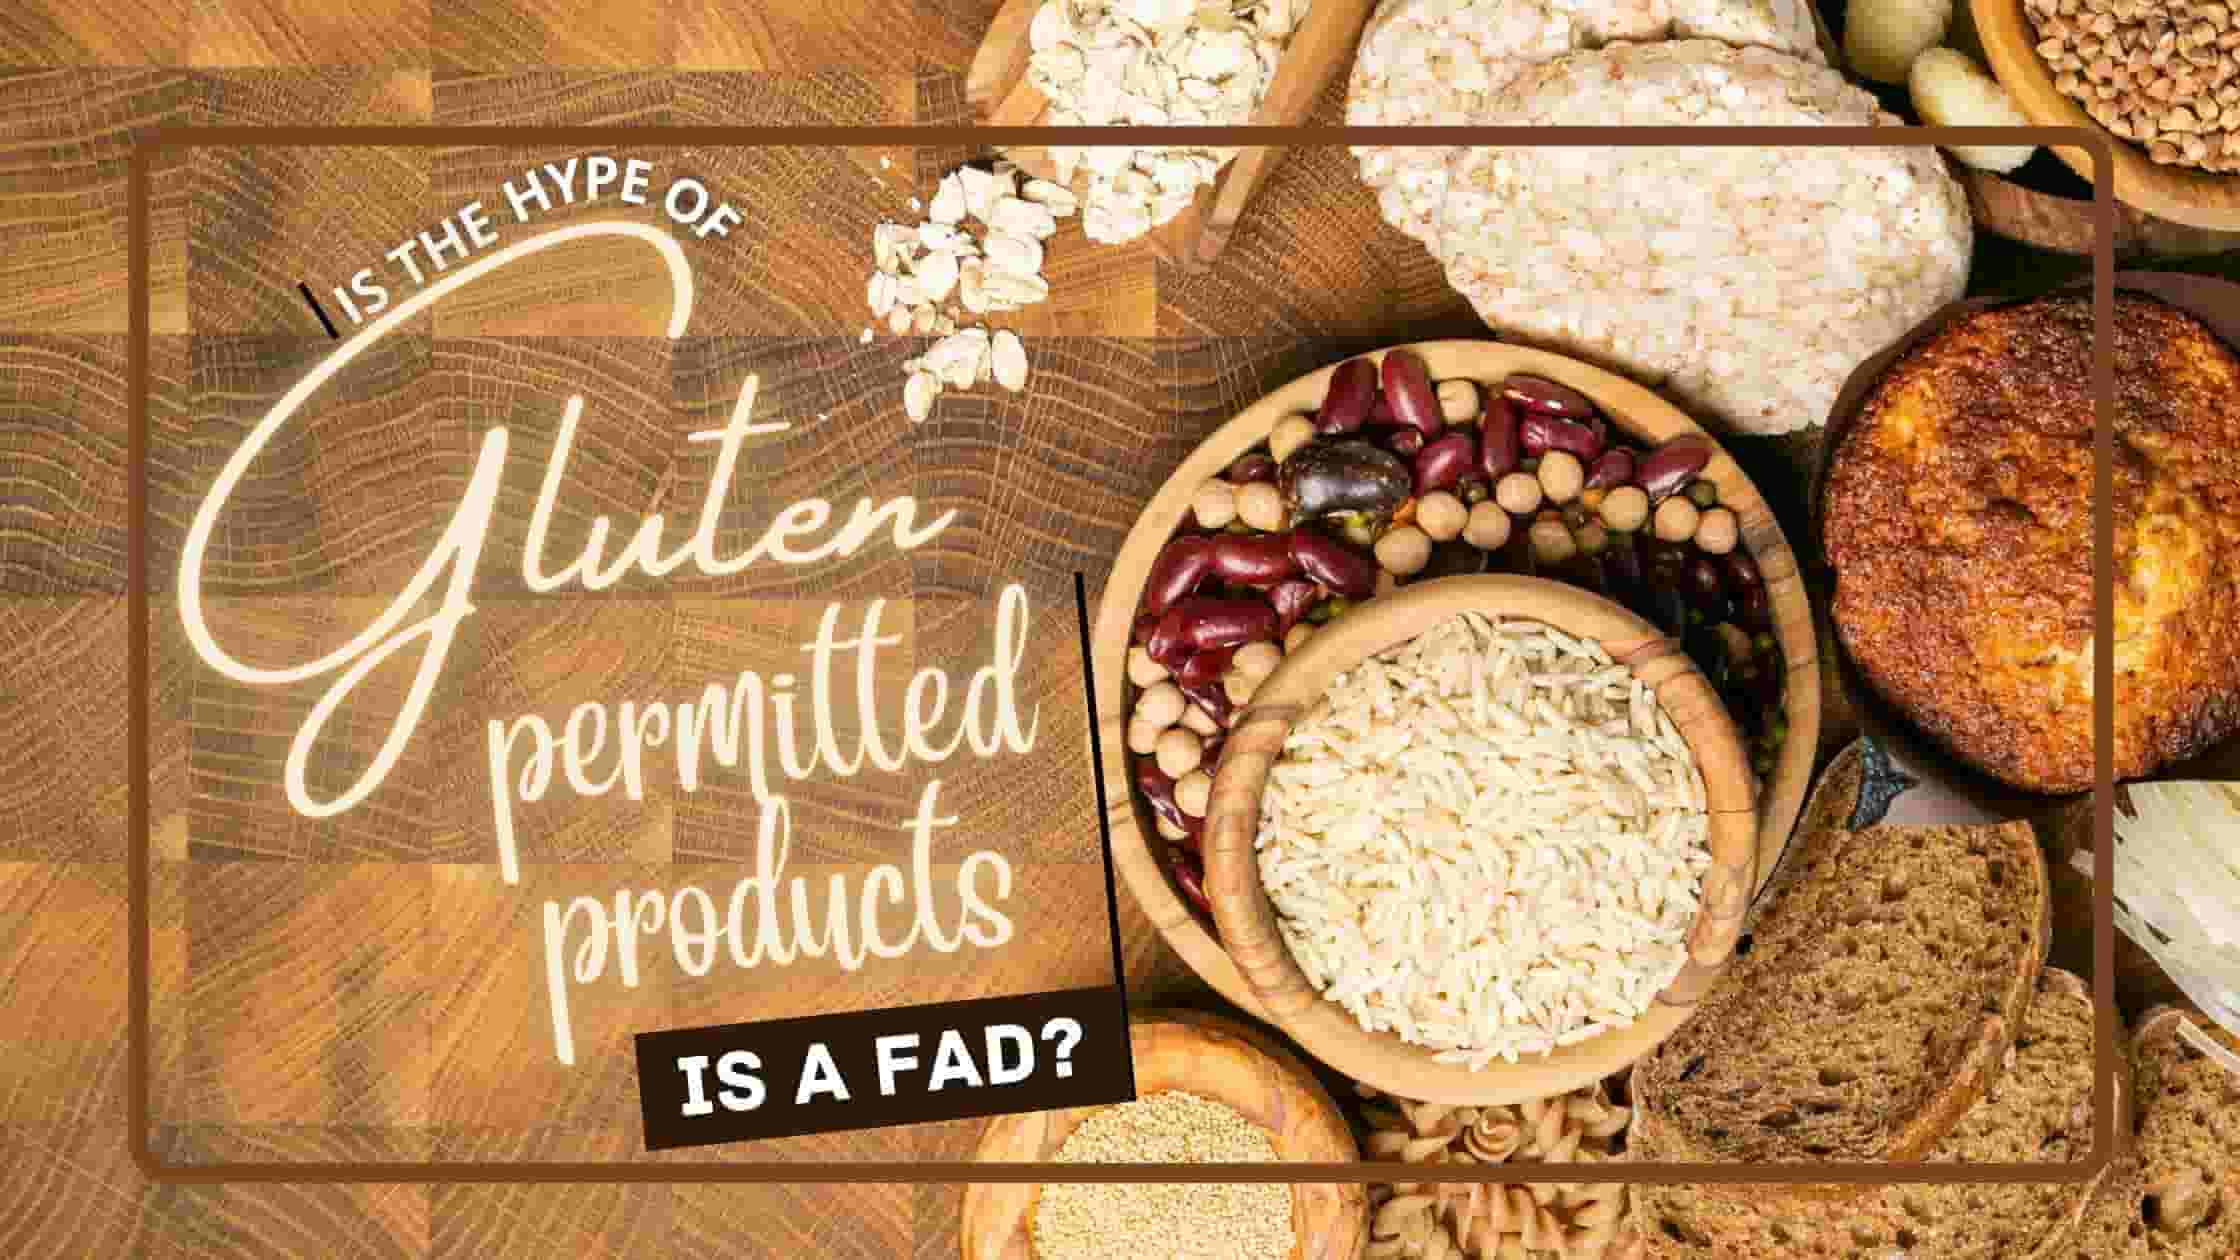 Is the hype of Gluten-permitted products-Is a Fad